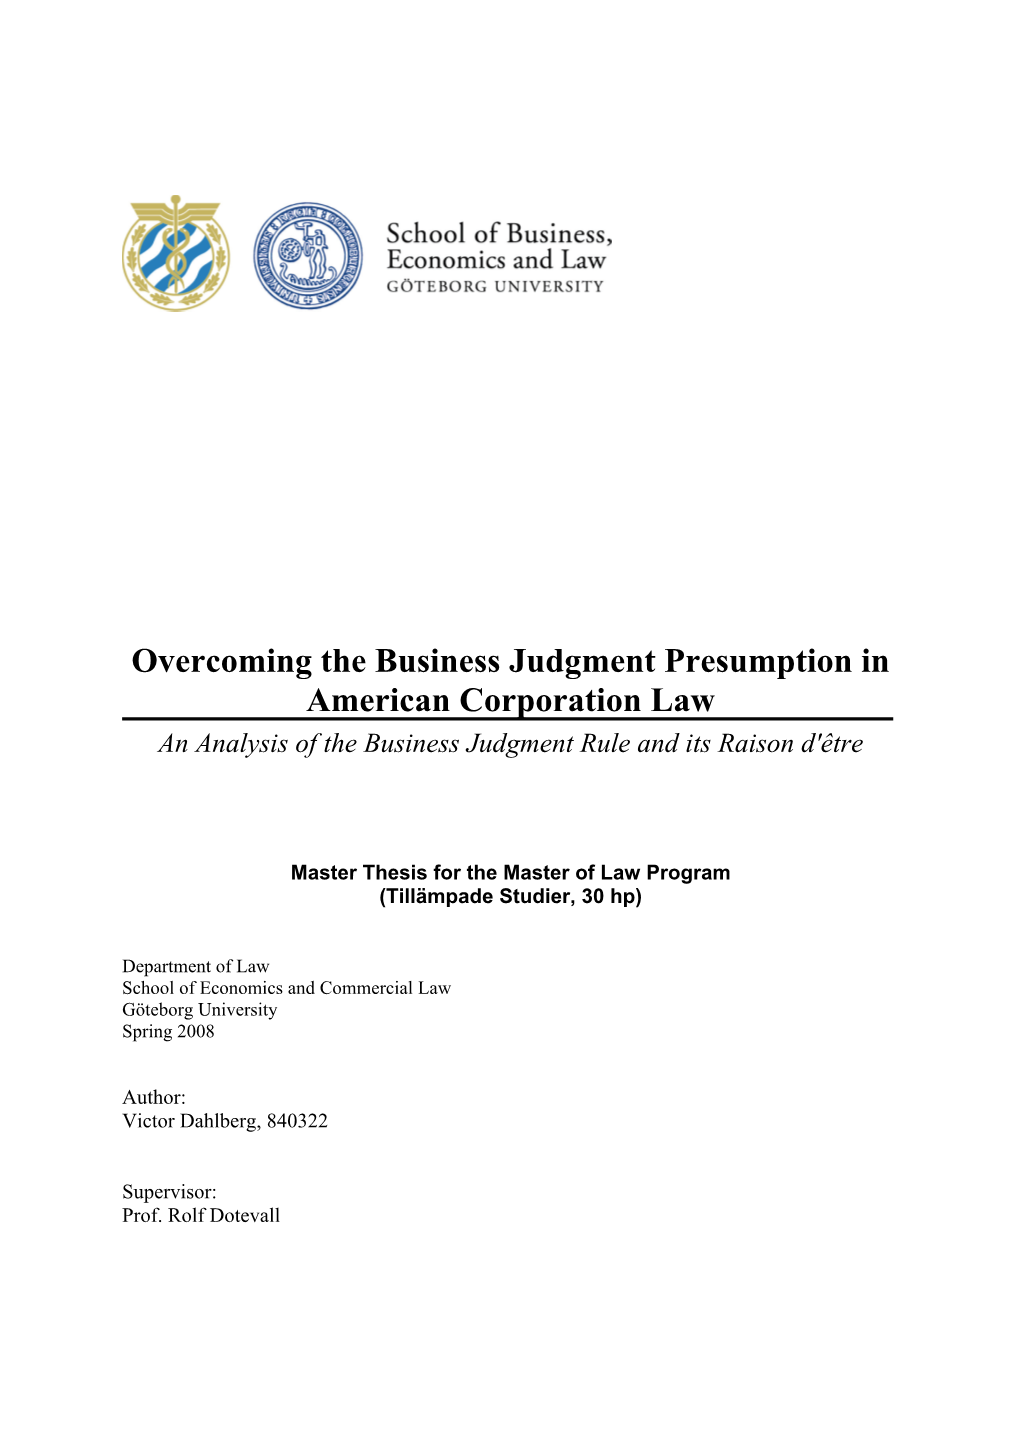 Overcoming the Business Judgment Presumption in American Corporation Law